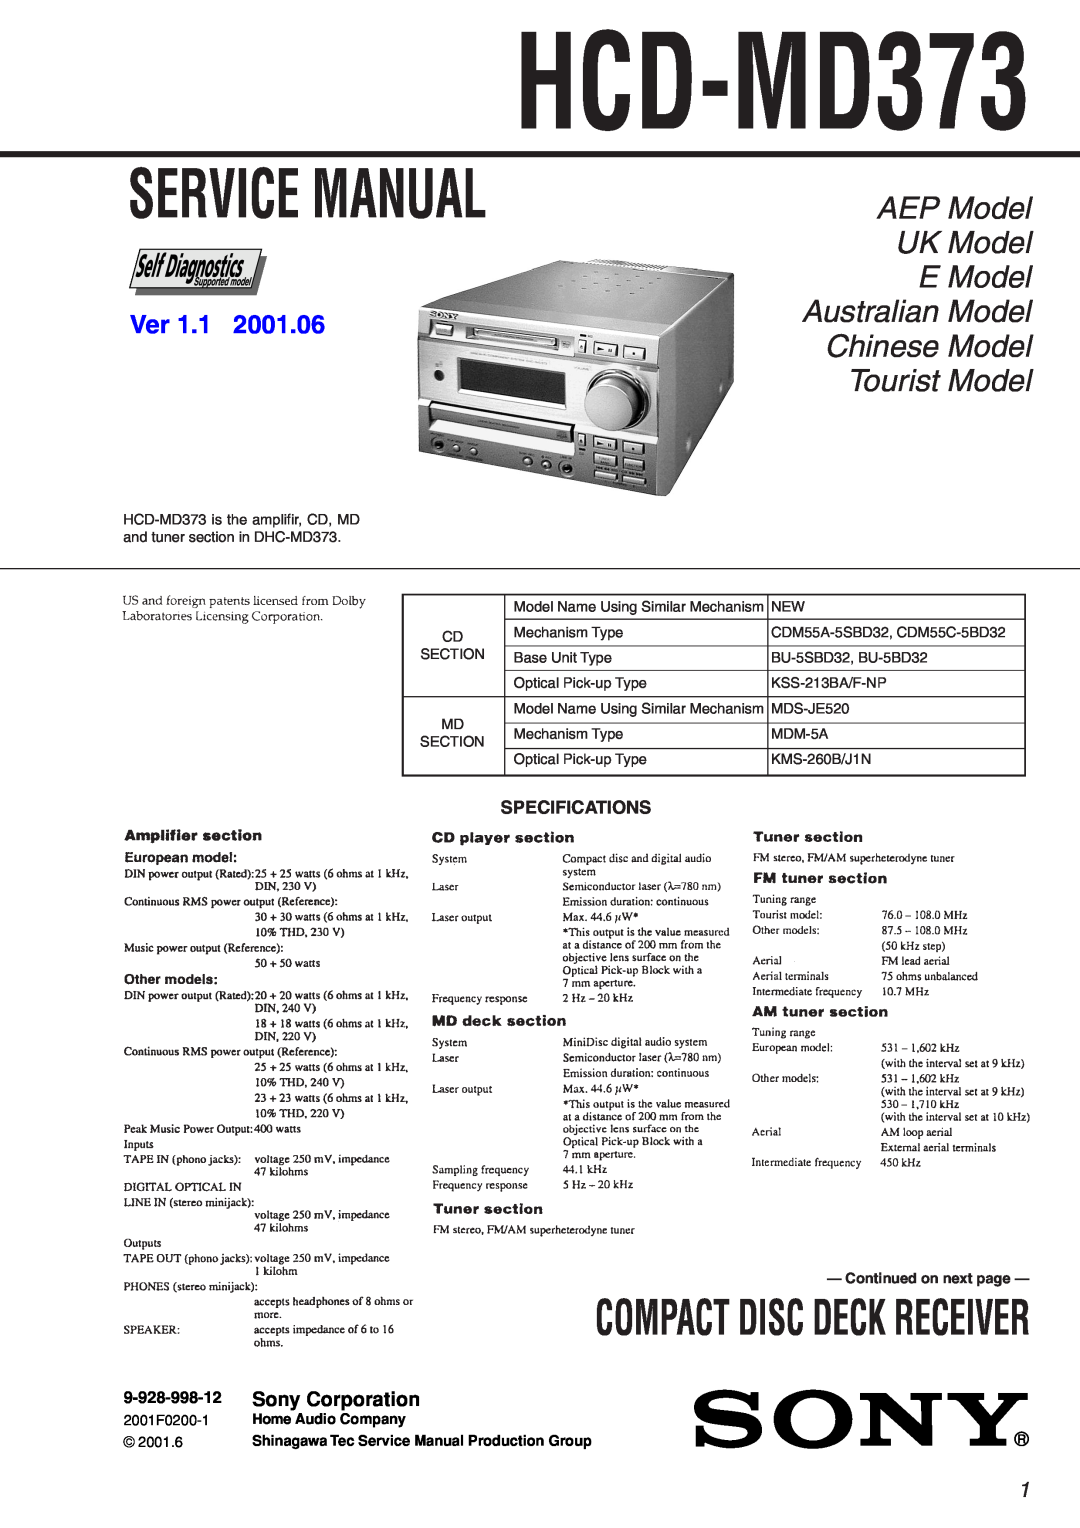 Sony HCD-MD373 service manual Sony Corporation, Specifications, 9-928-998-12, Compact Disc Deck Receiver, Service Manual 